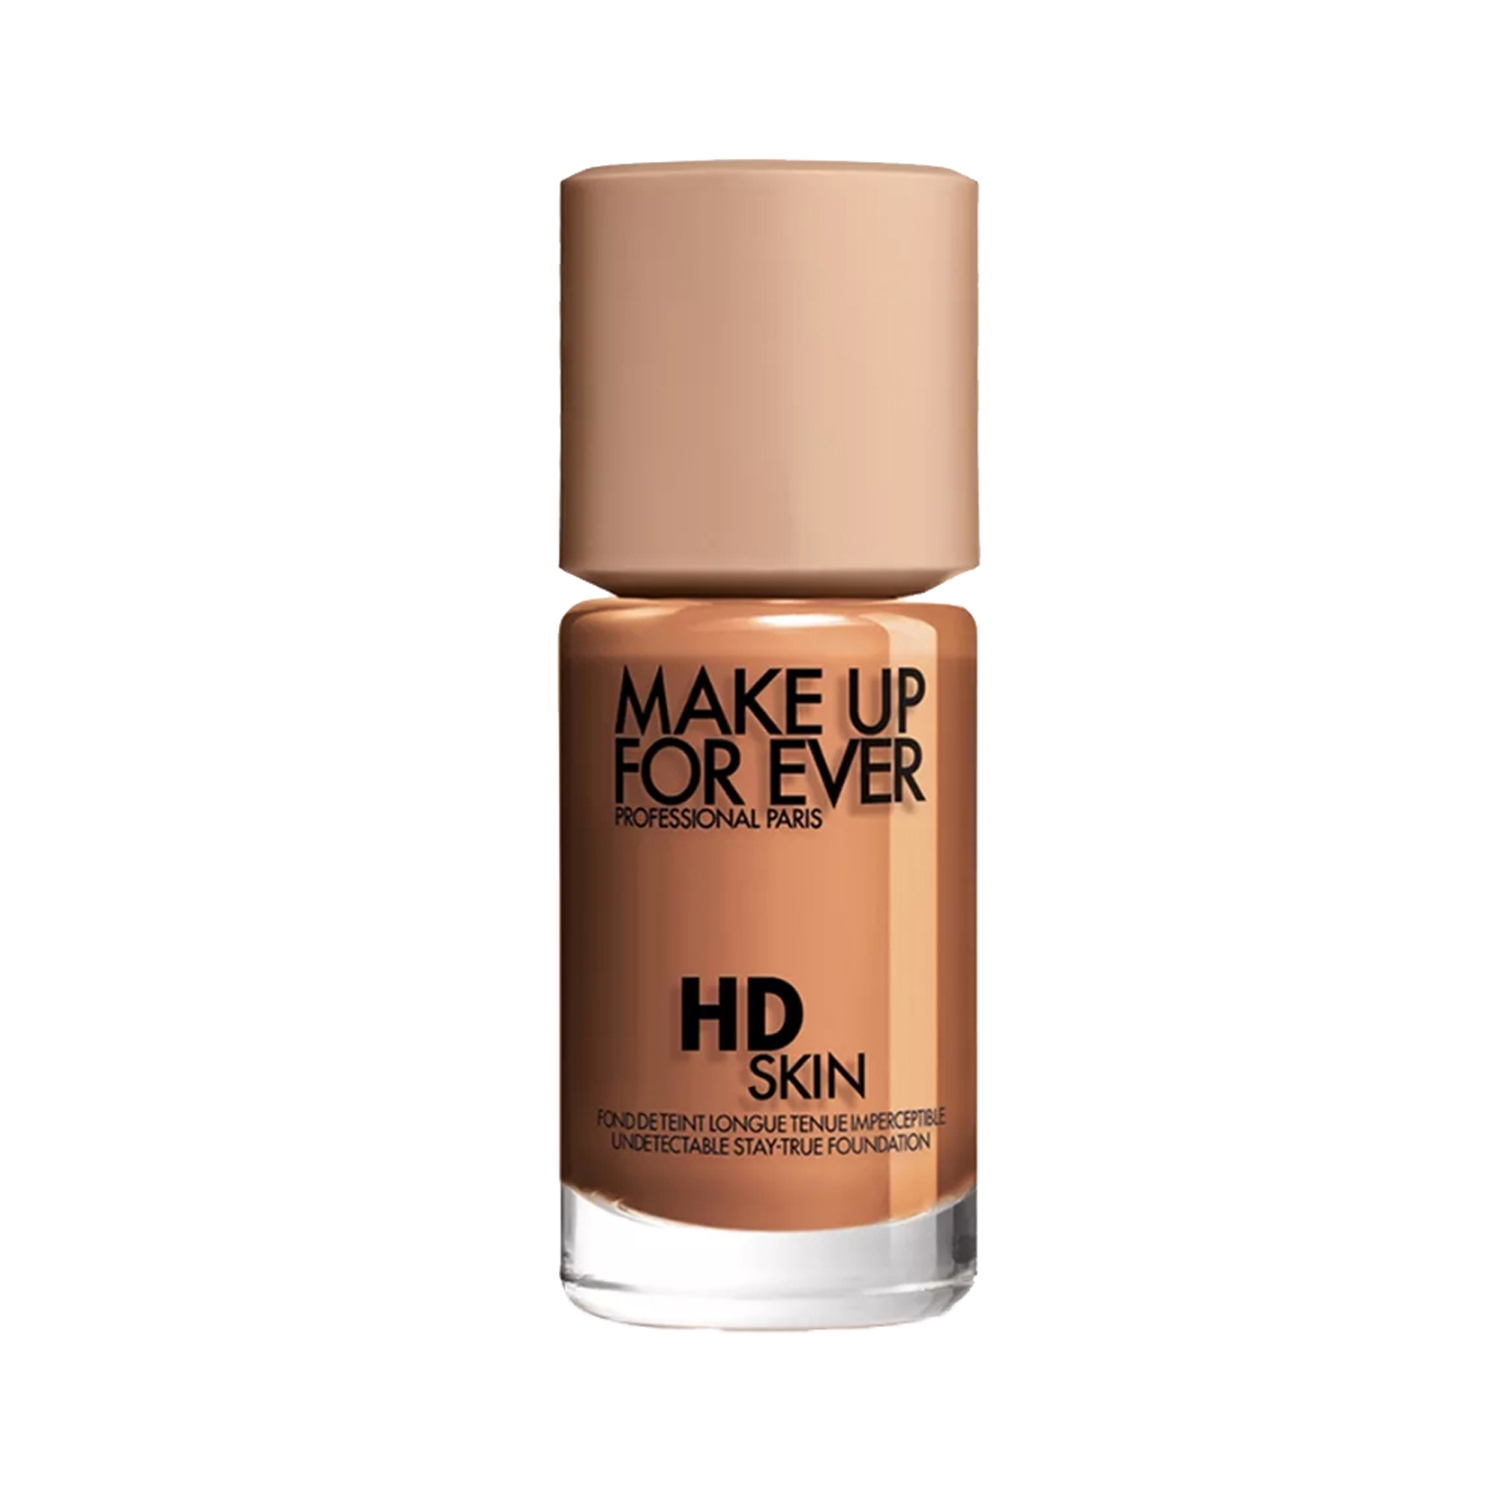 Make Up For Ever | Make Up For Ever Hd Skin Foundation-3Y56 (Y445) (30ml)